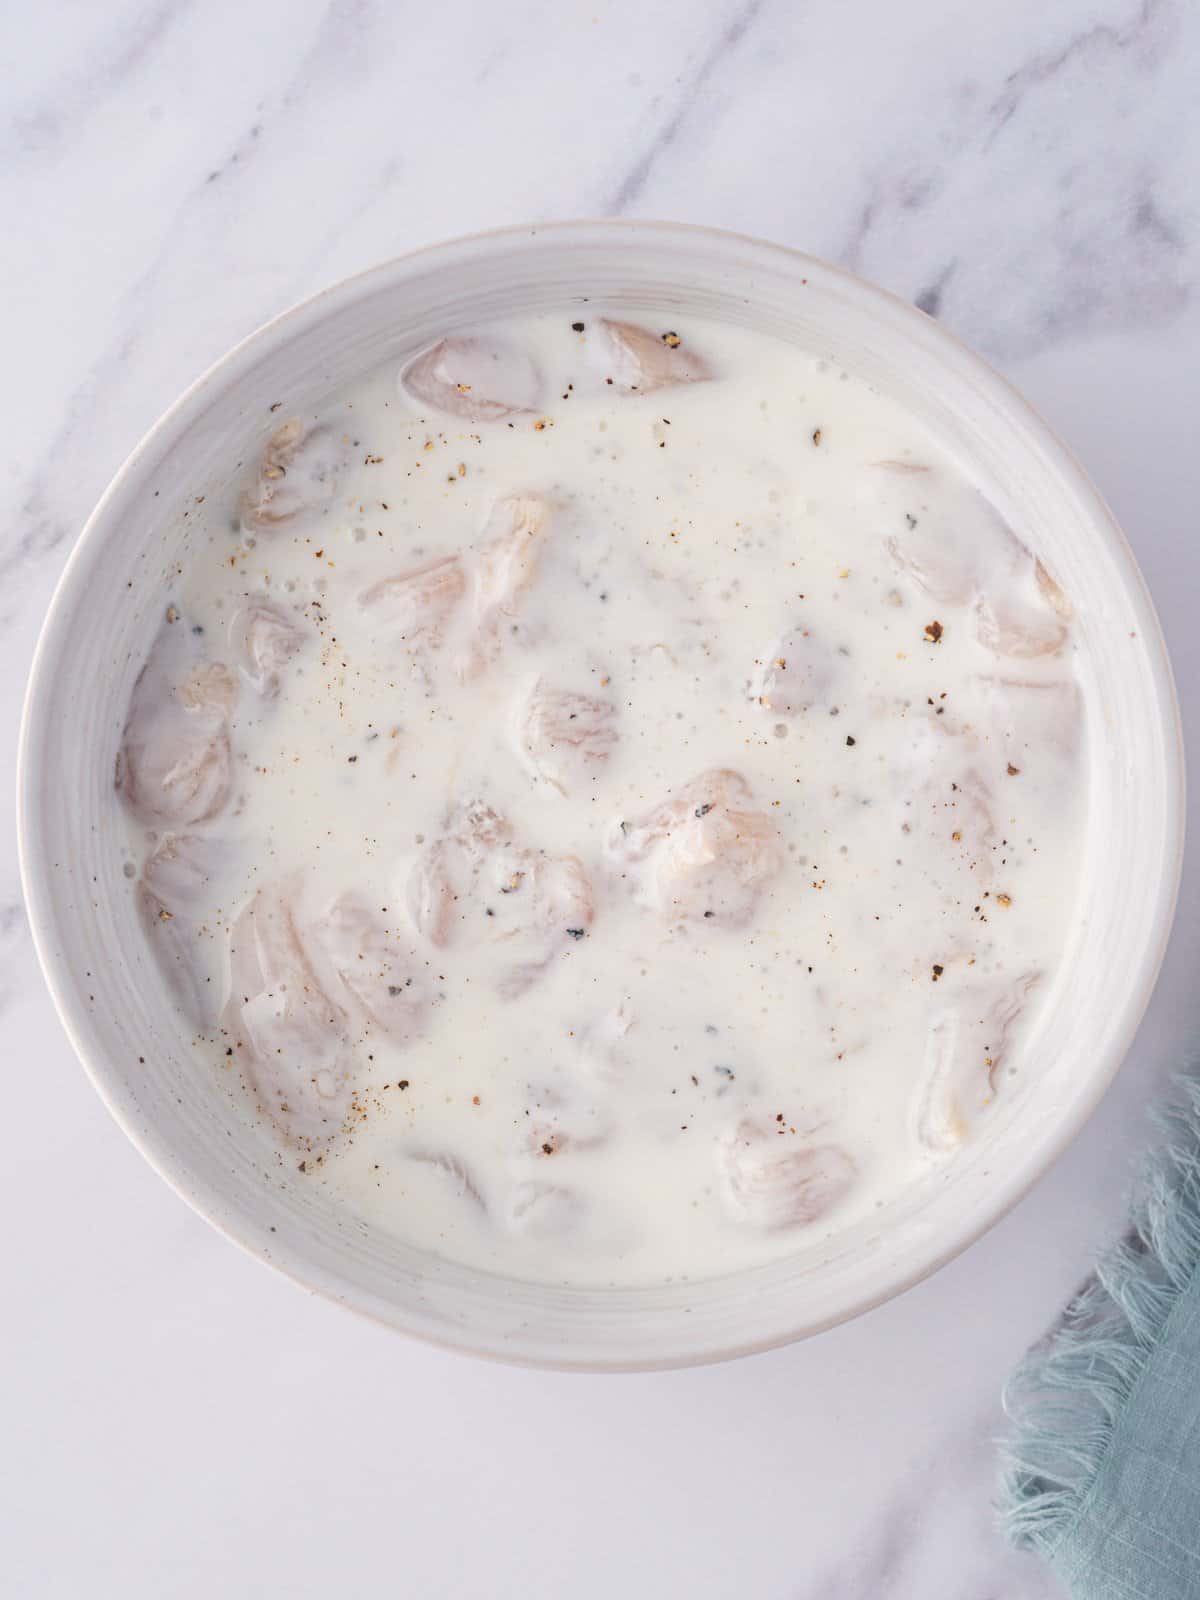 Raw chicken nuggets marinating in a bowl of seasoned buttermilk.